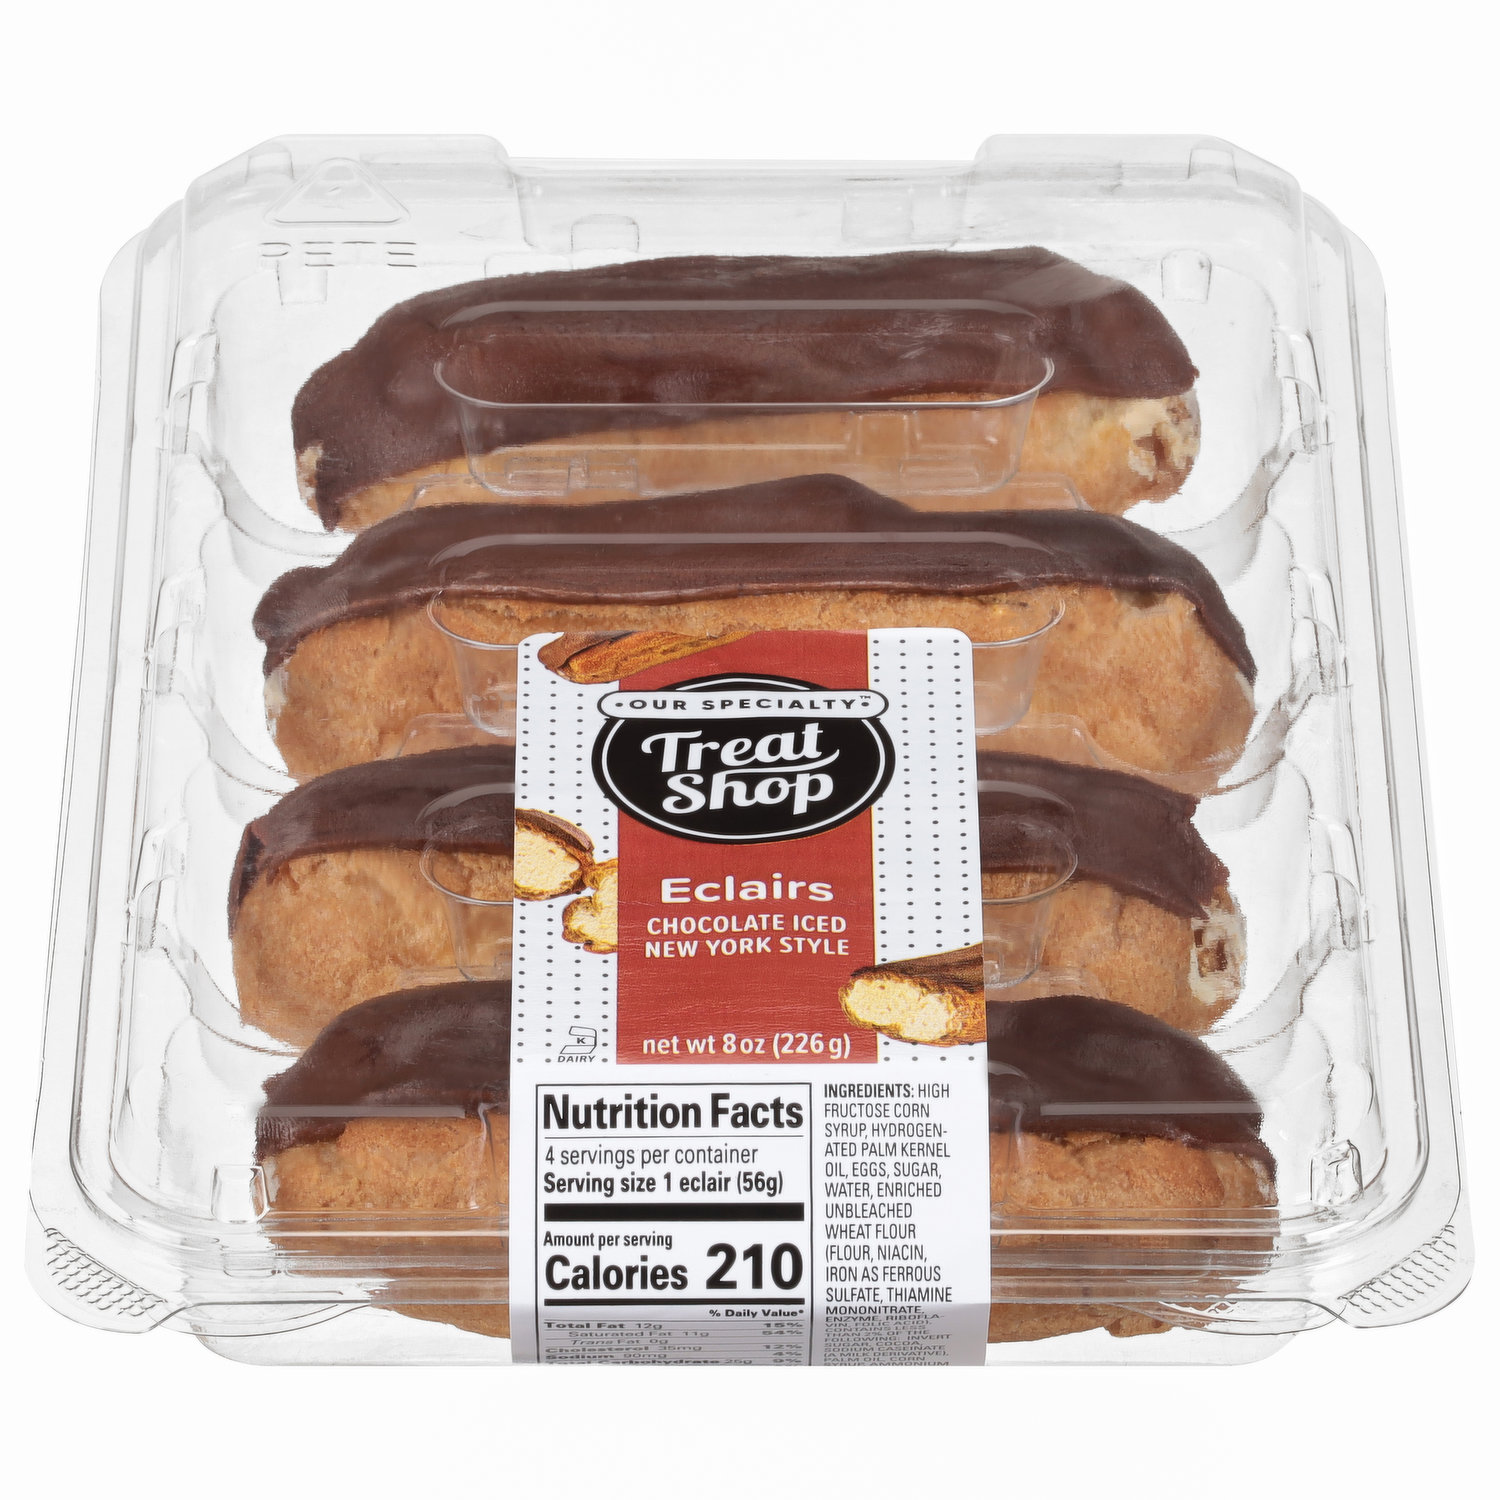 Chocolate Frosted Mini Donuts - bake shop - 56g